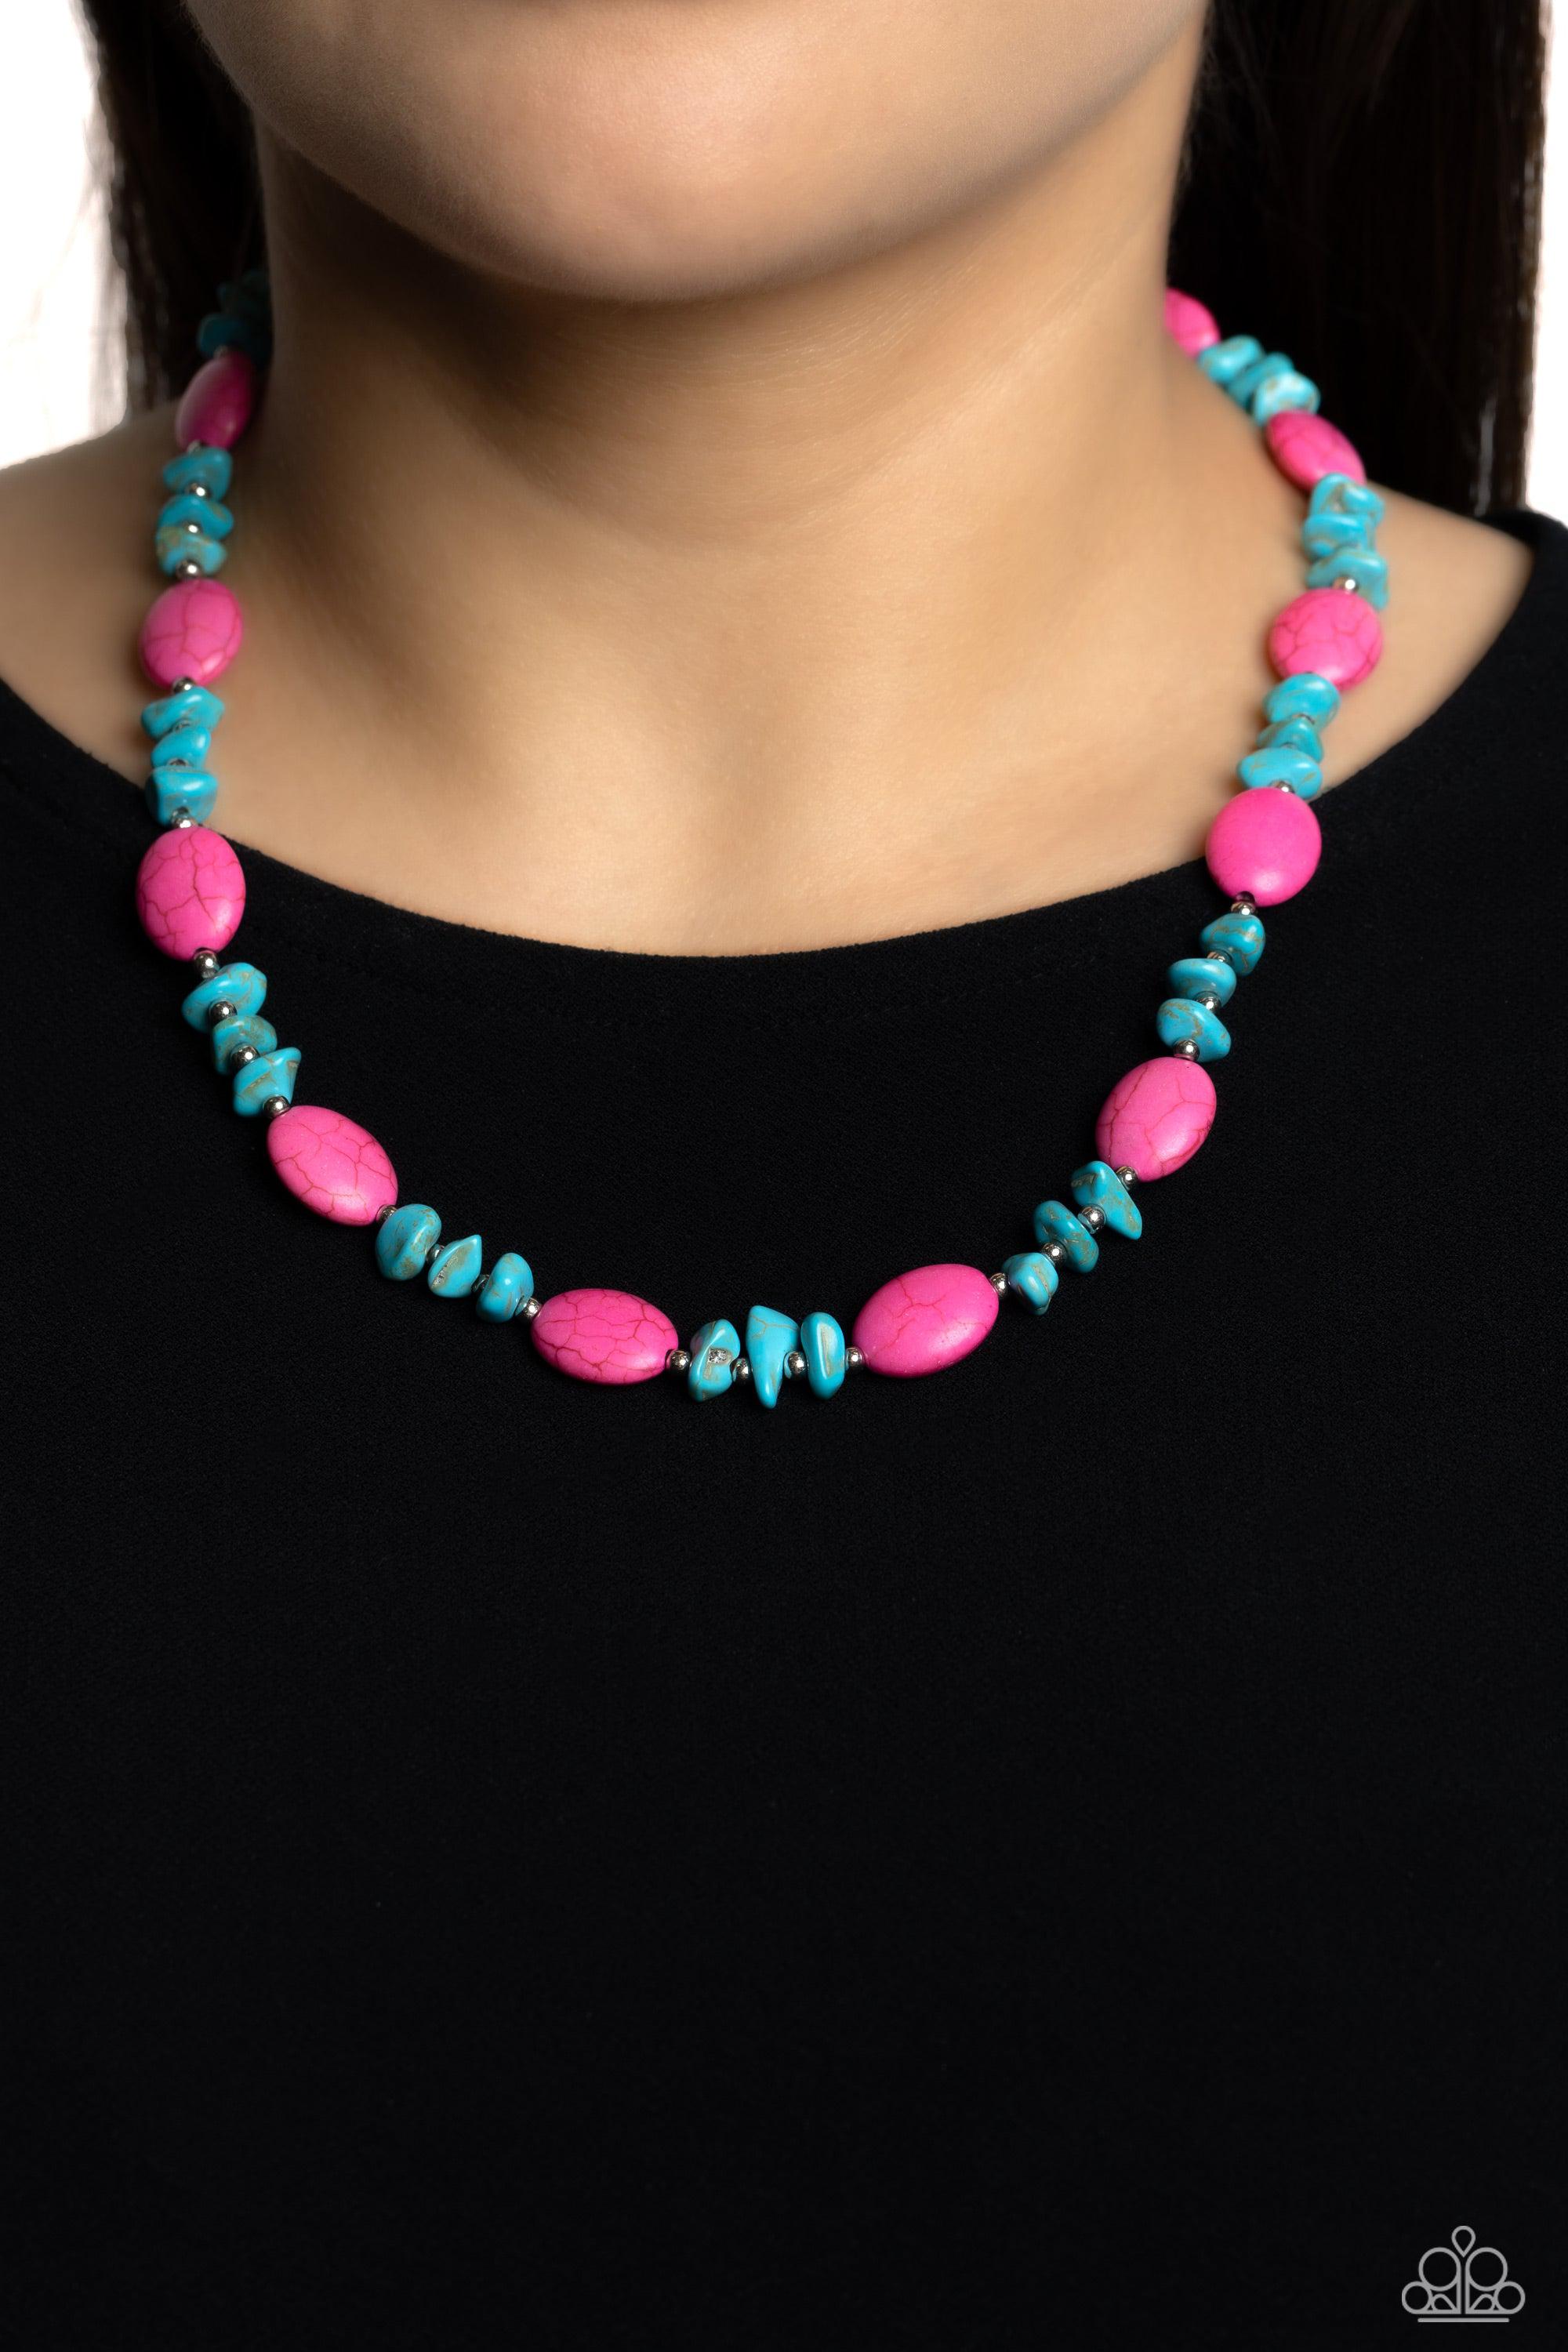 Stone Age Showcase Pink & Turquoise Stone Necklace- lightbox - CarasShop.com - $5 Jewelry by Cara Jewels